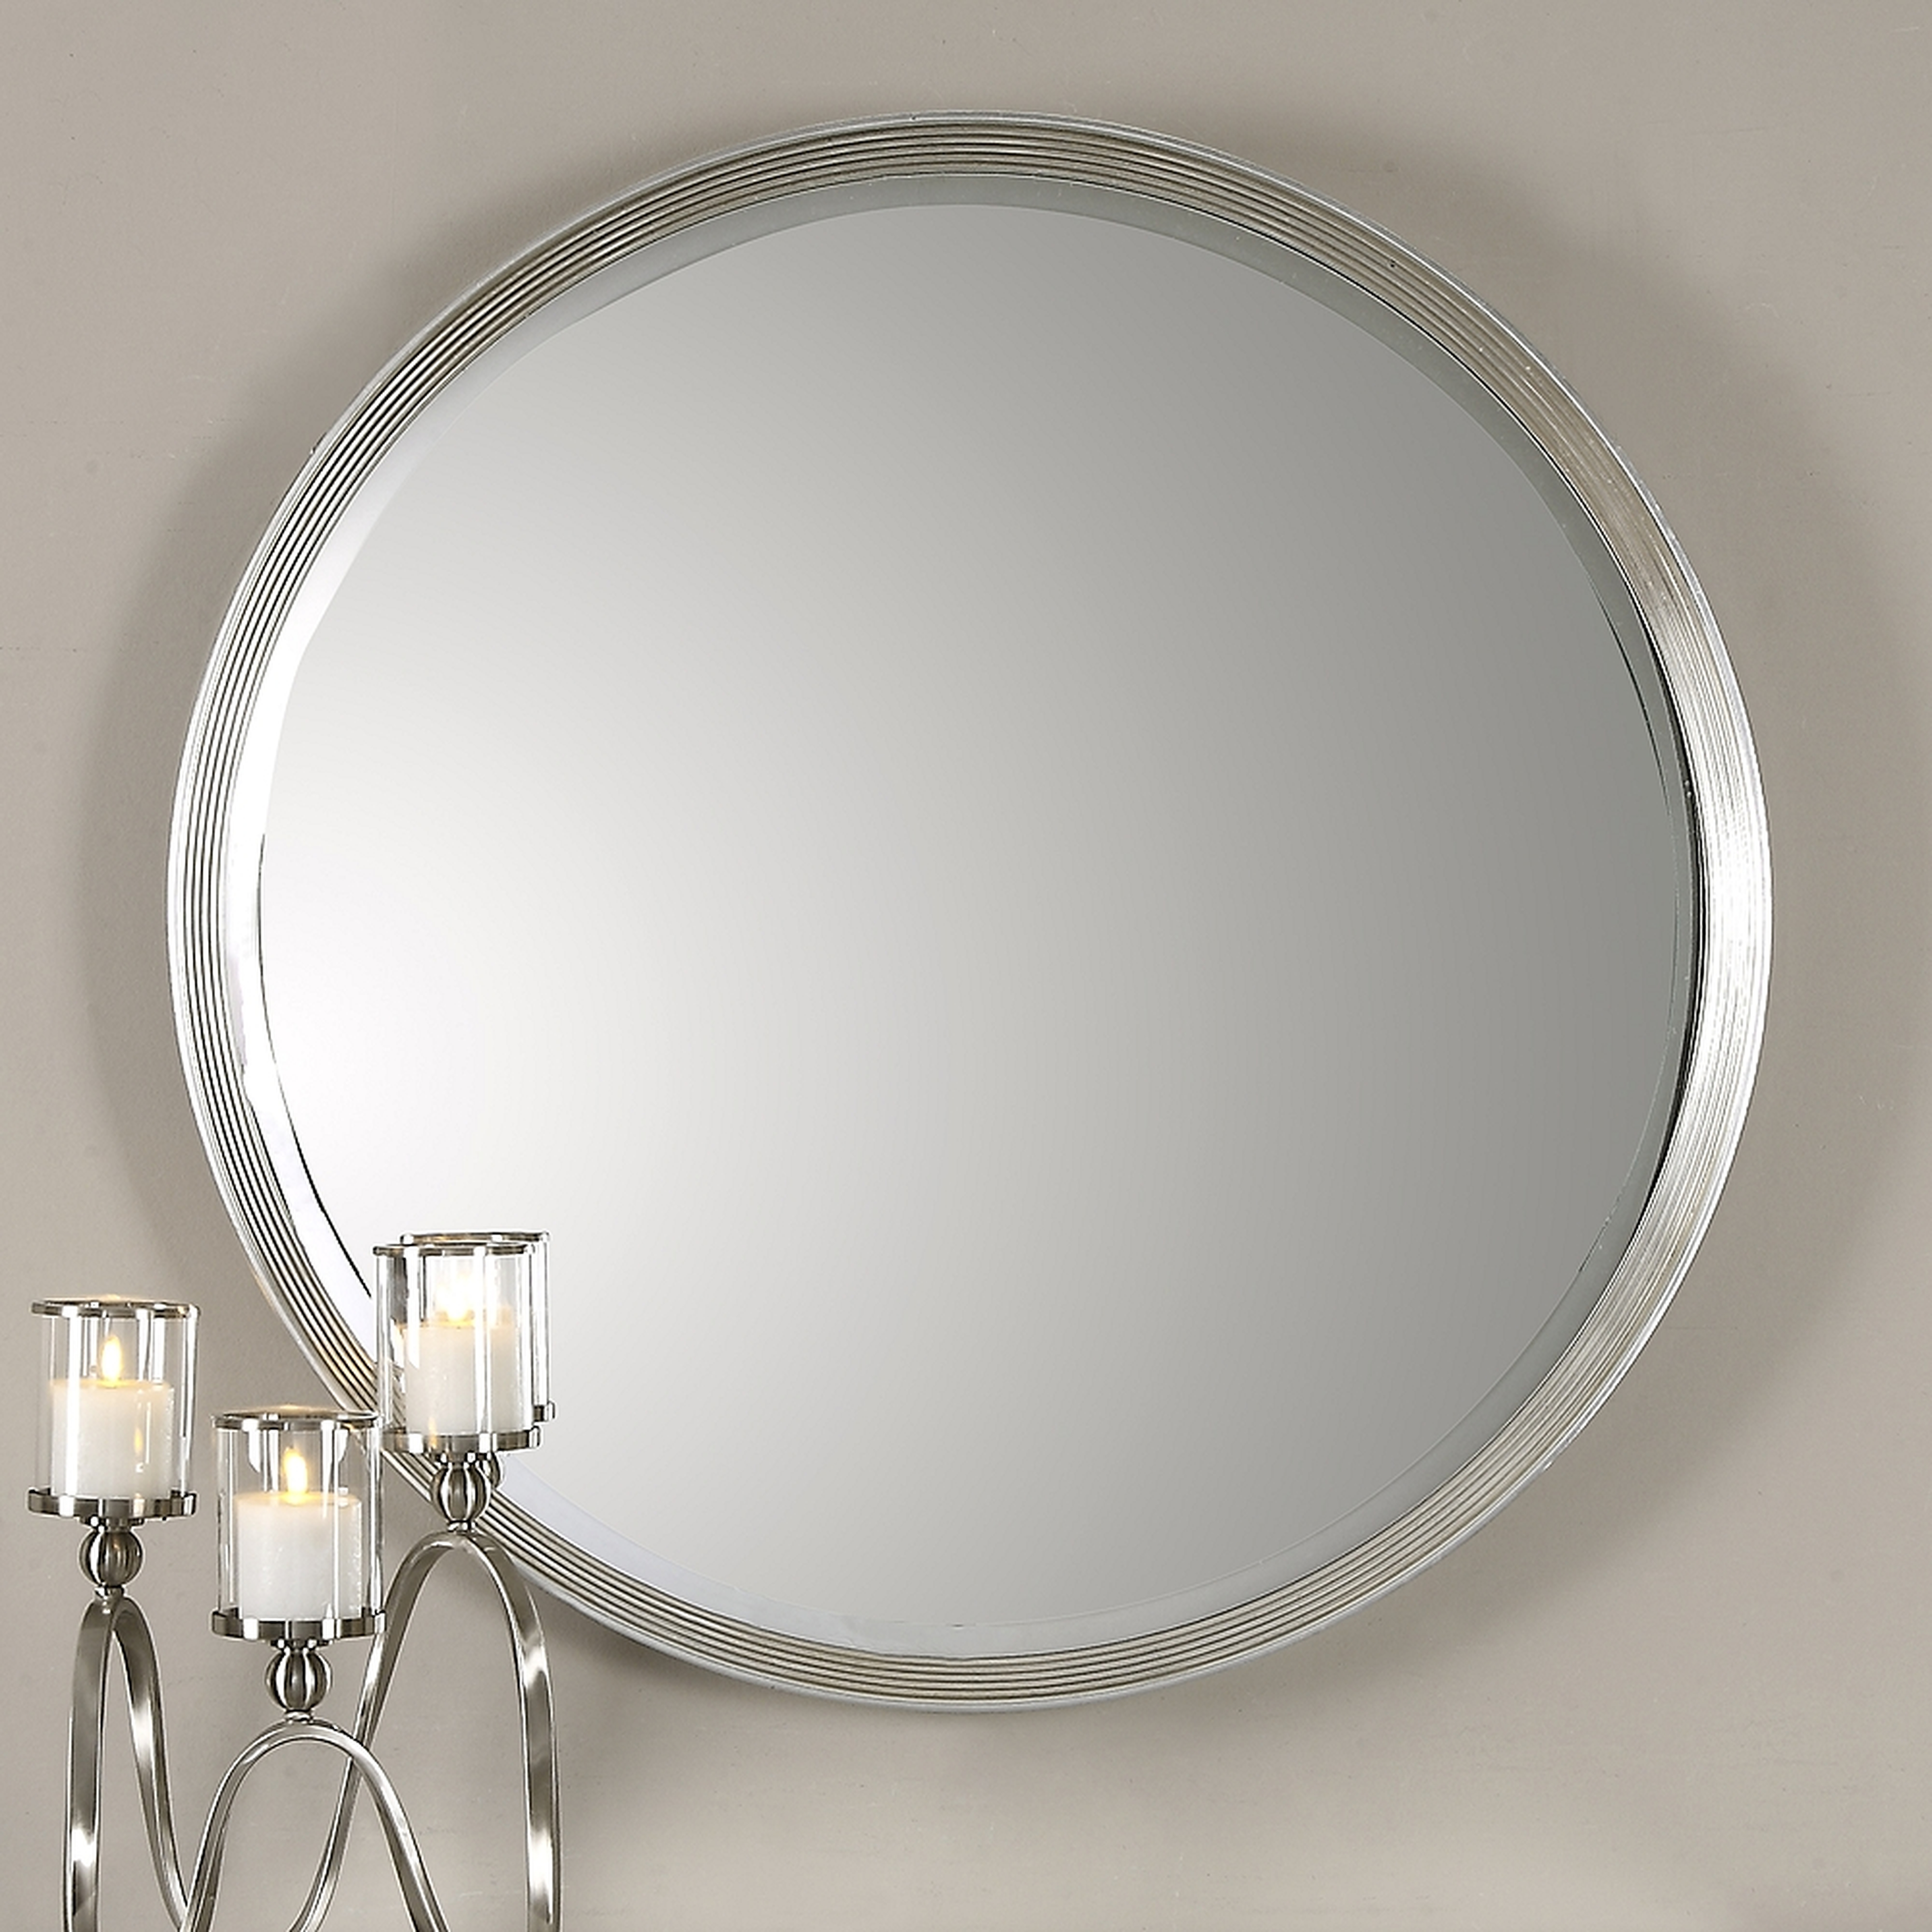 Serenza Silver Leaf 42" Round Oversized Wall Mirror - Style # 95W30 - Lamps Plus